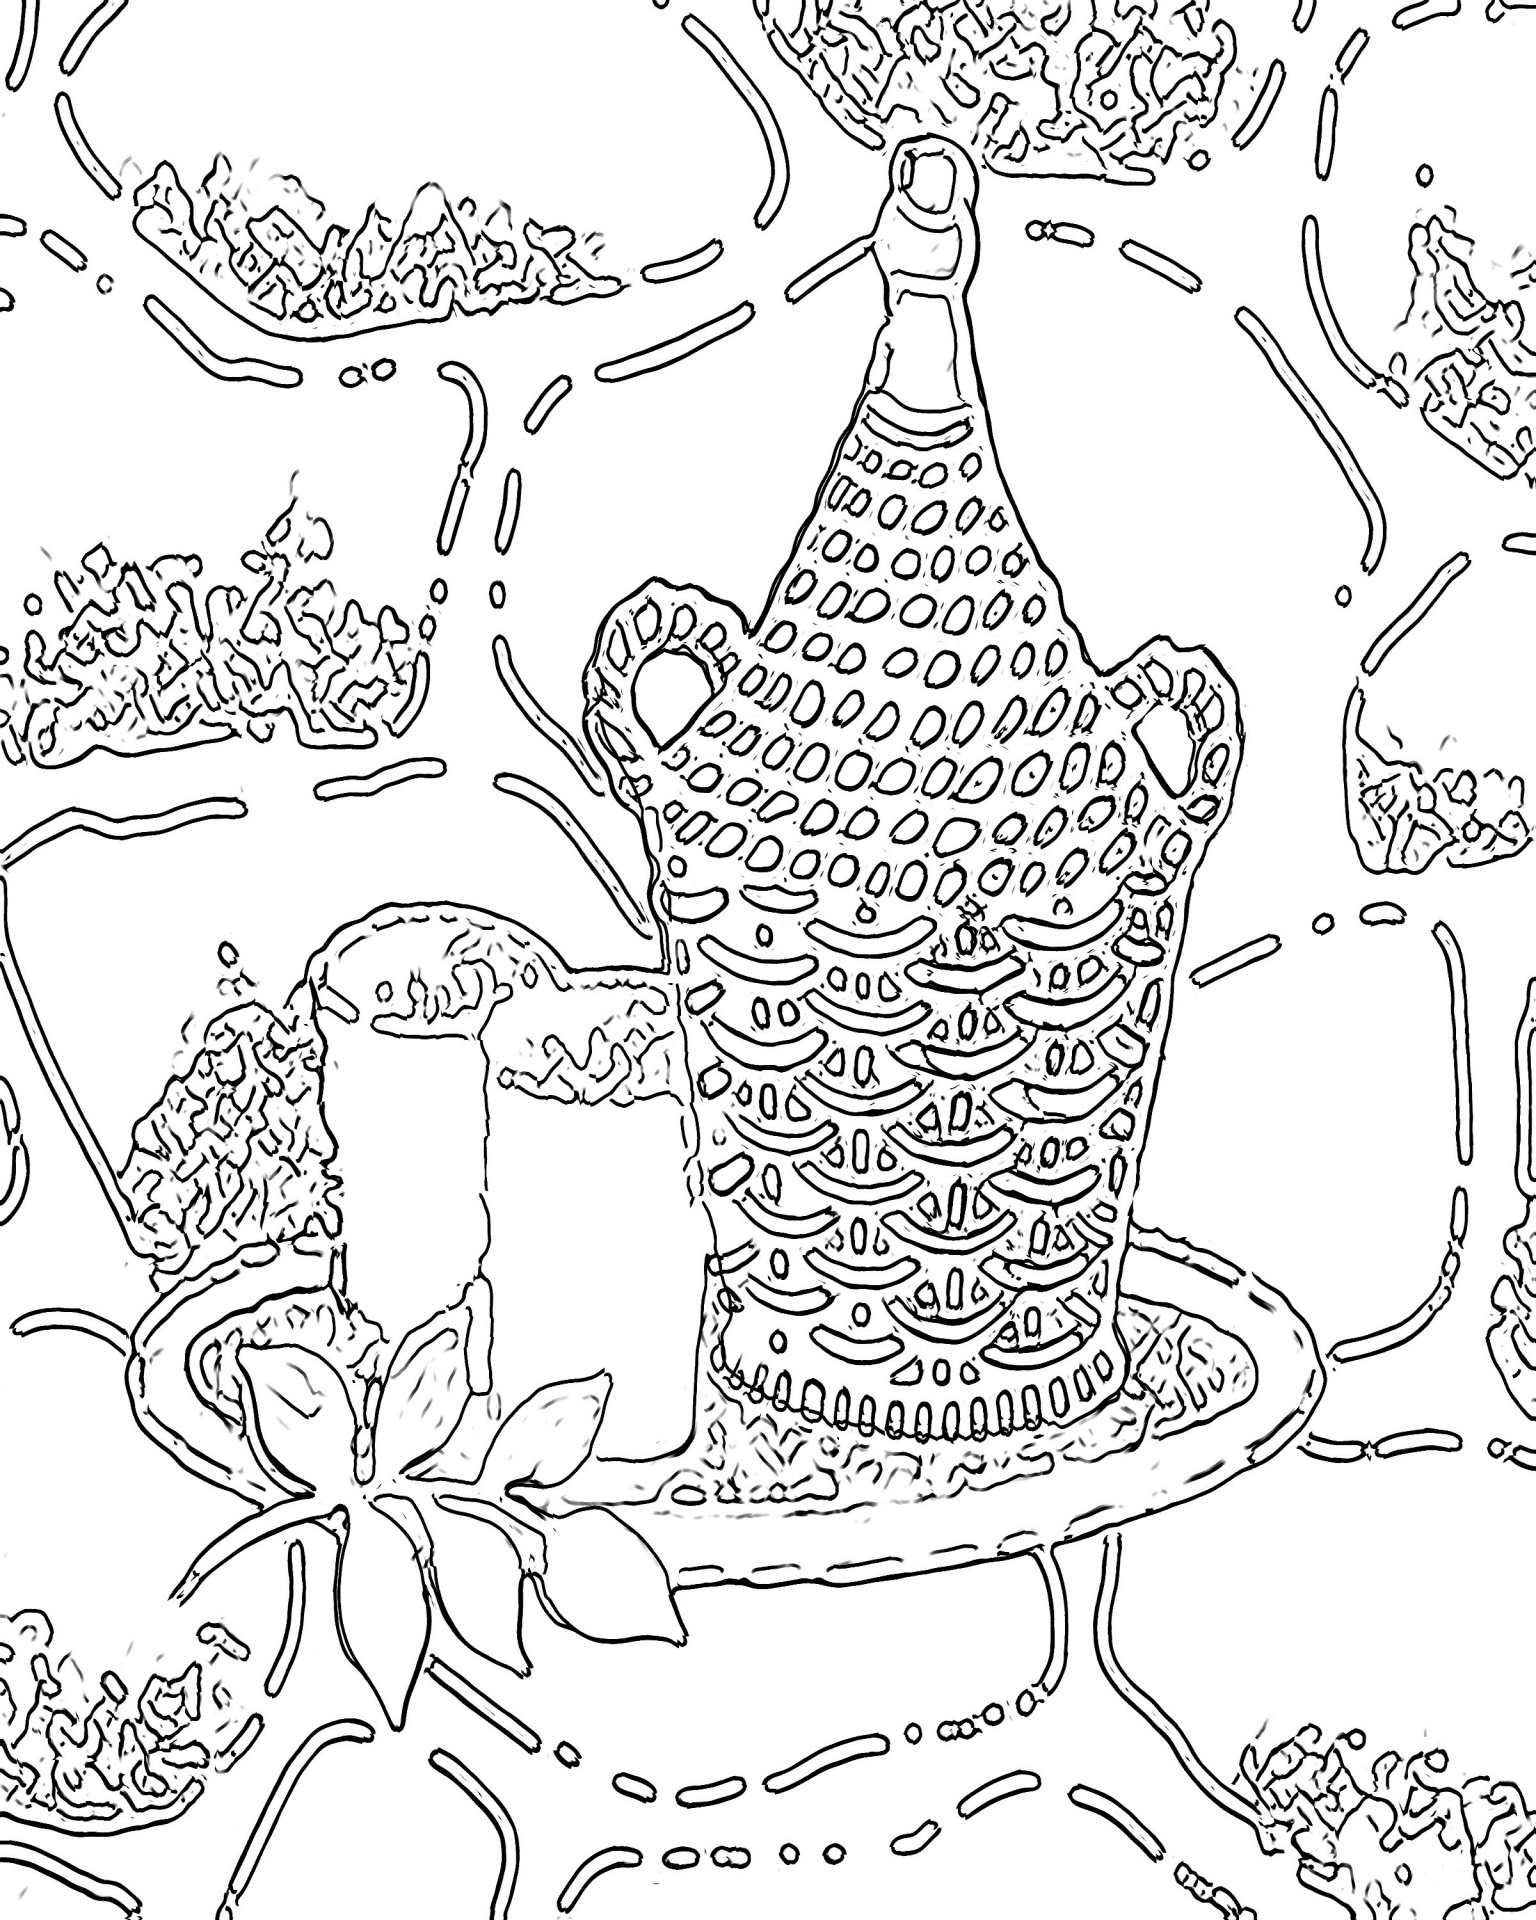 Free Printable Abstract Coloring Pages For Adults Coloring Wallpapers Download Free Images Wallpaper [coloring365.blogspot.com]